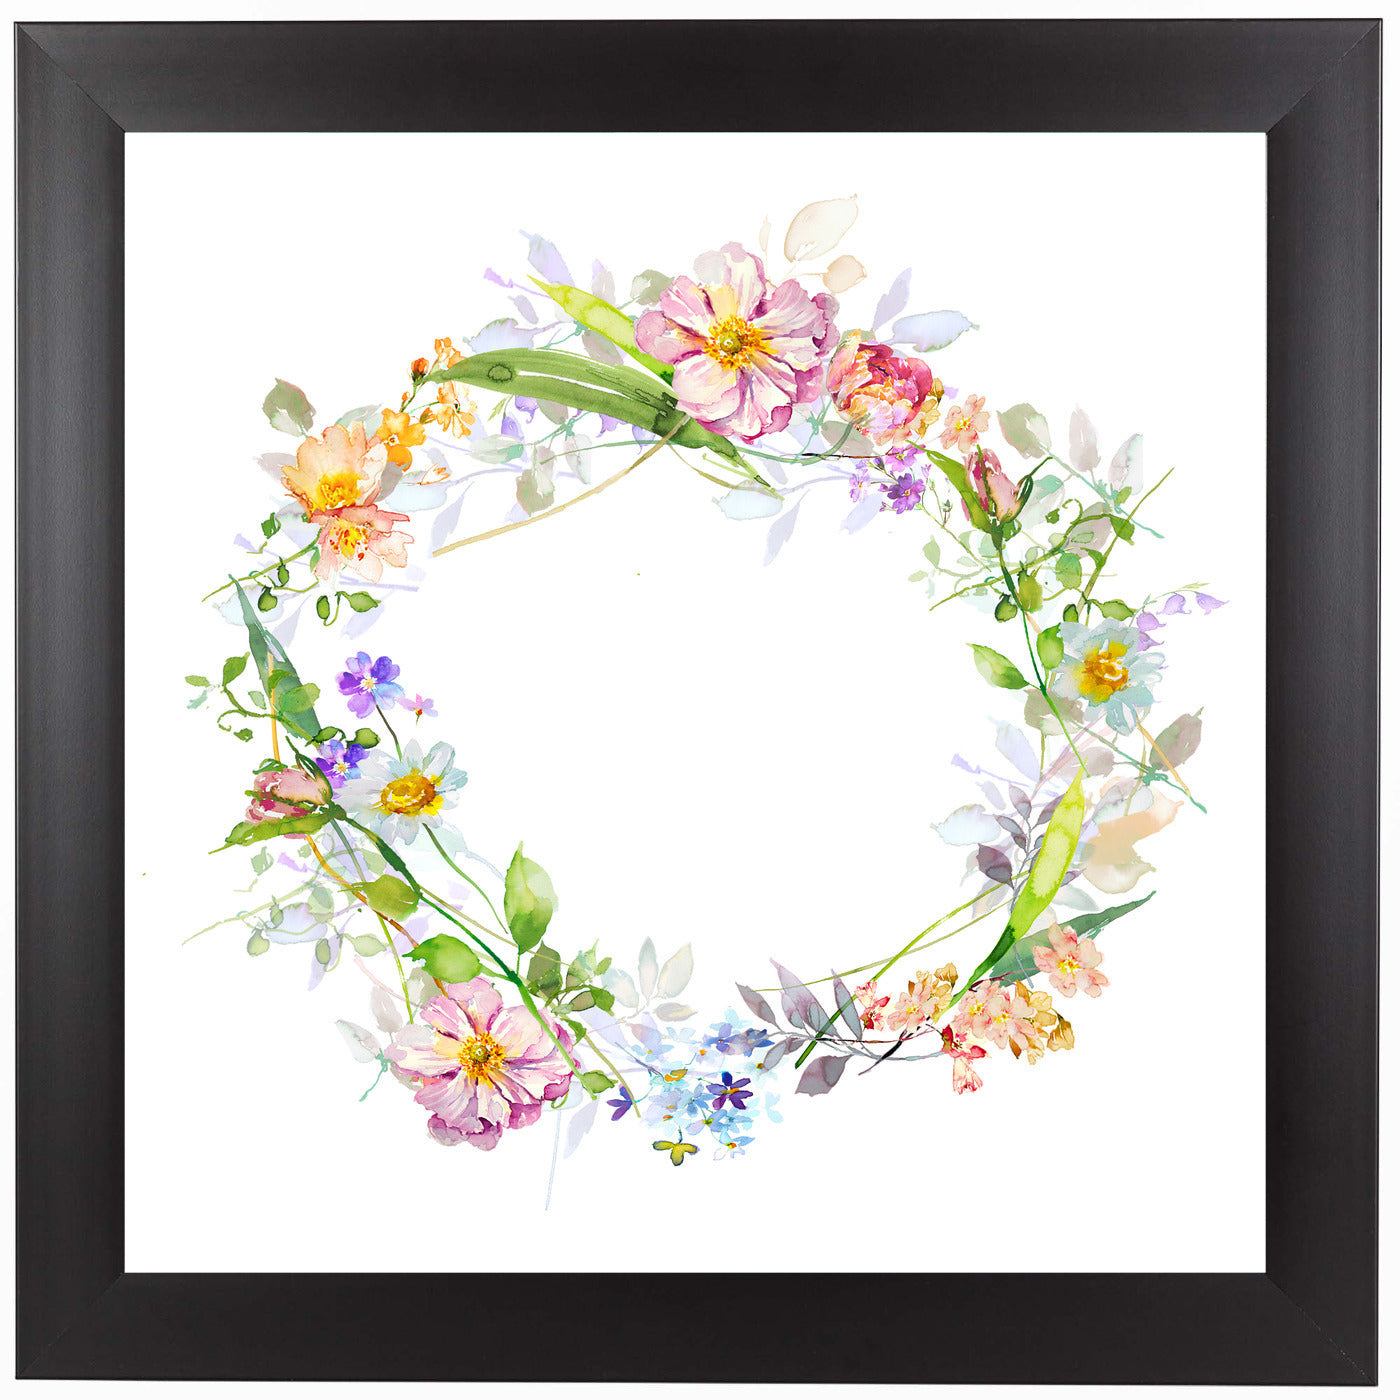 Floral Wreath by Harrison Ripley Framed Print - Americanflat